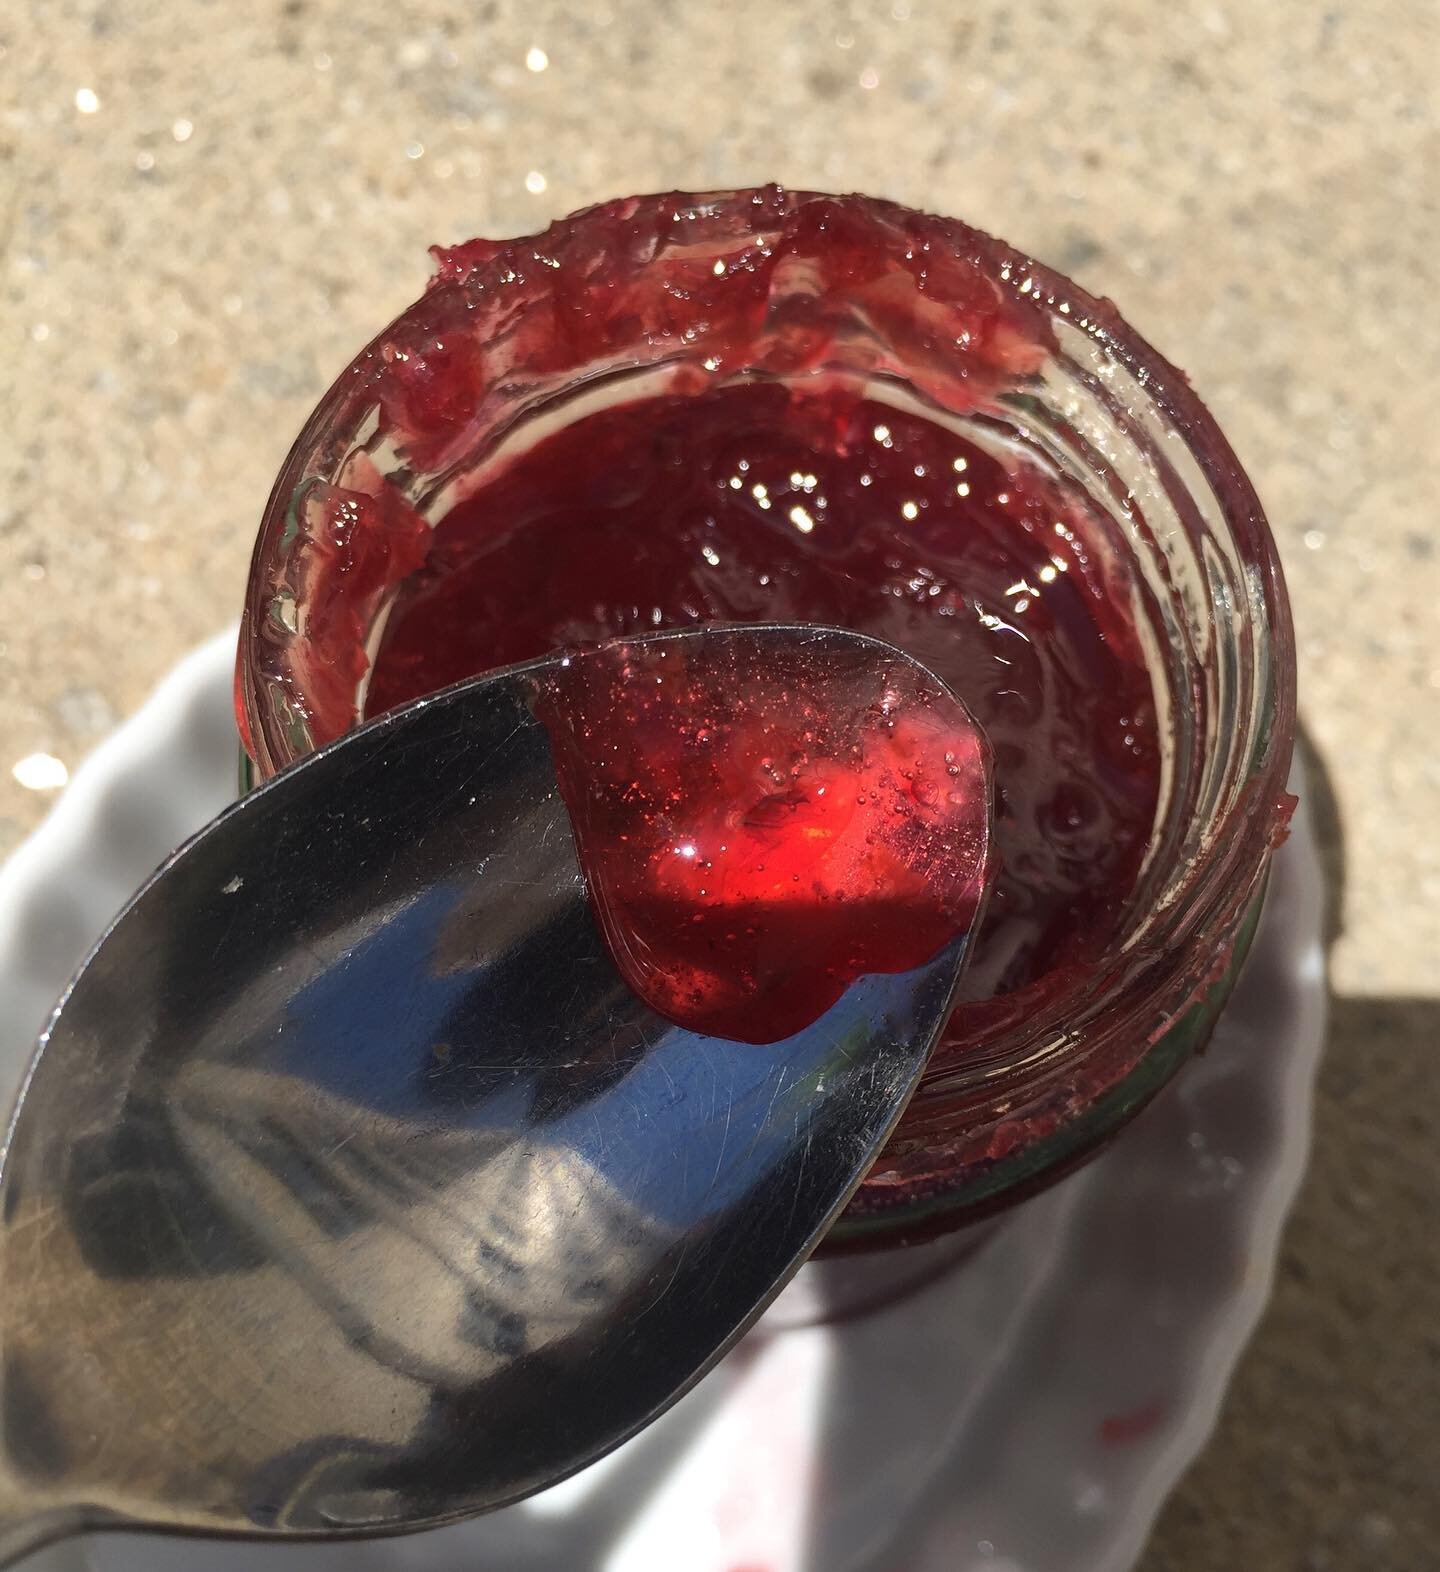 Last June I made a fresh rose petal jam, and by some happy accident the recipe went wrong.
instead of a jam, I ended up with a chewy, unspreadable jar of rose petal goo.

It's divine.

I am not sure if I could create the mistake again, (which probabl